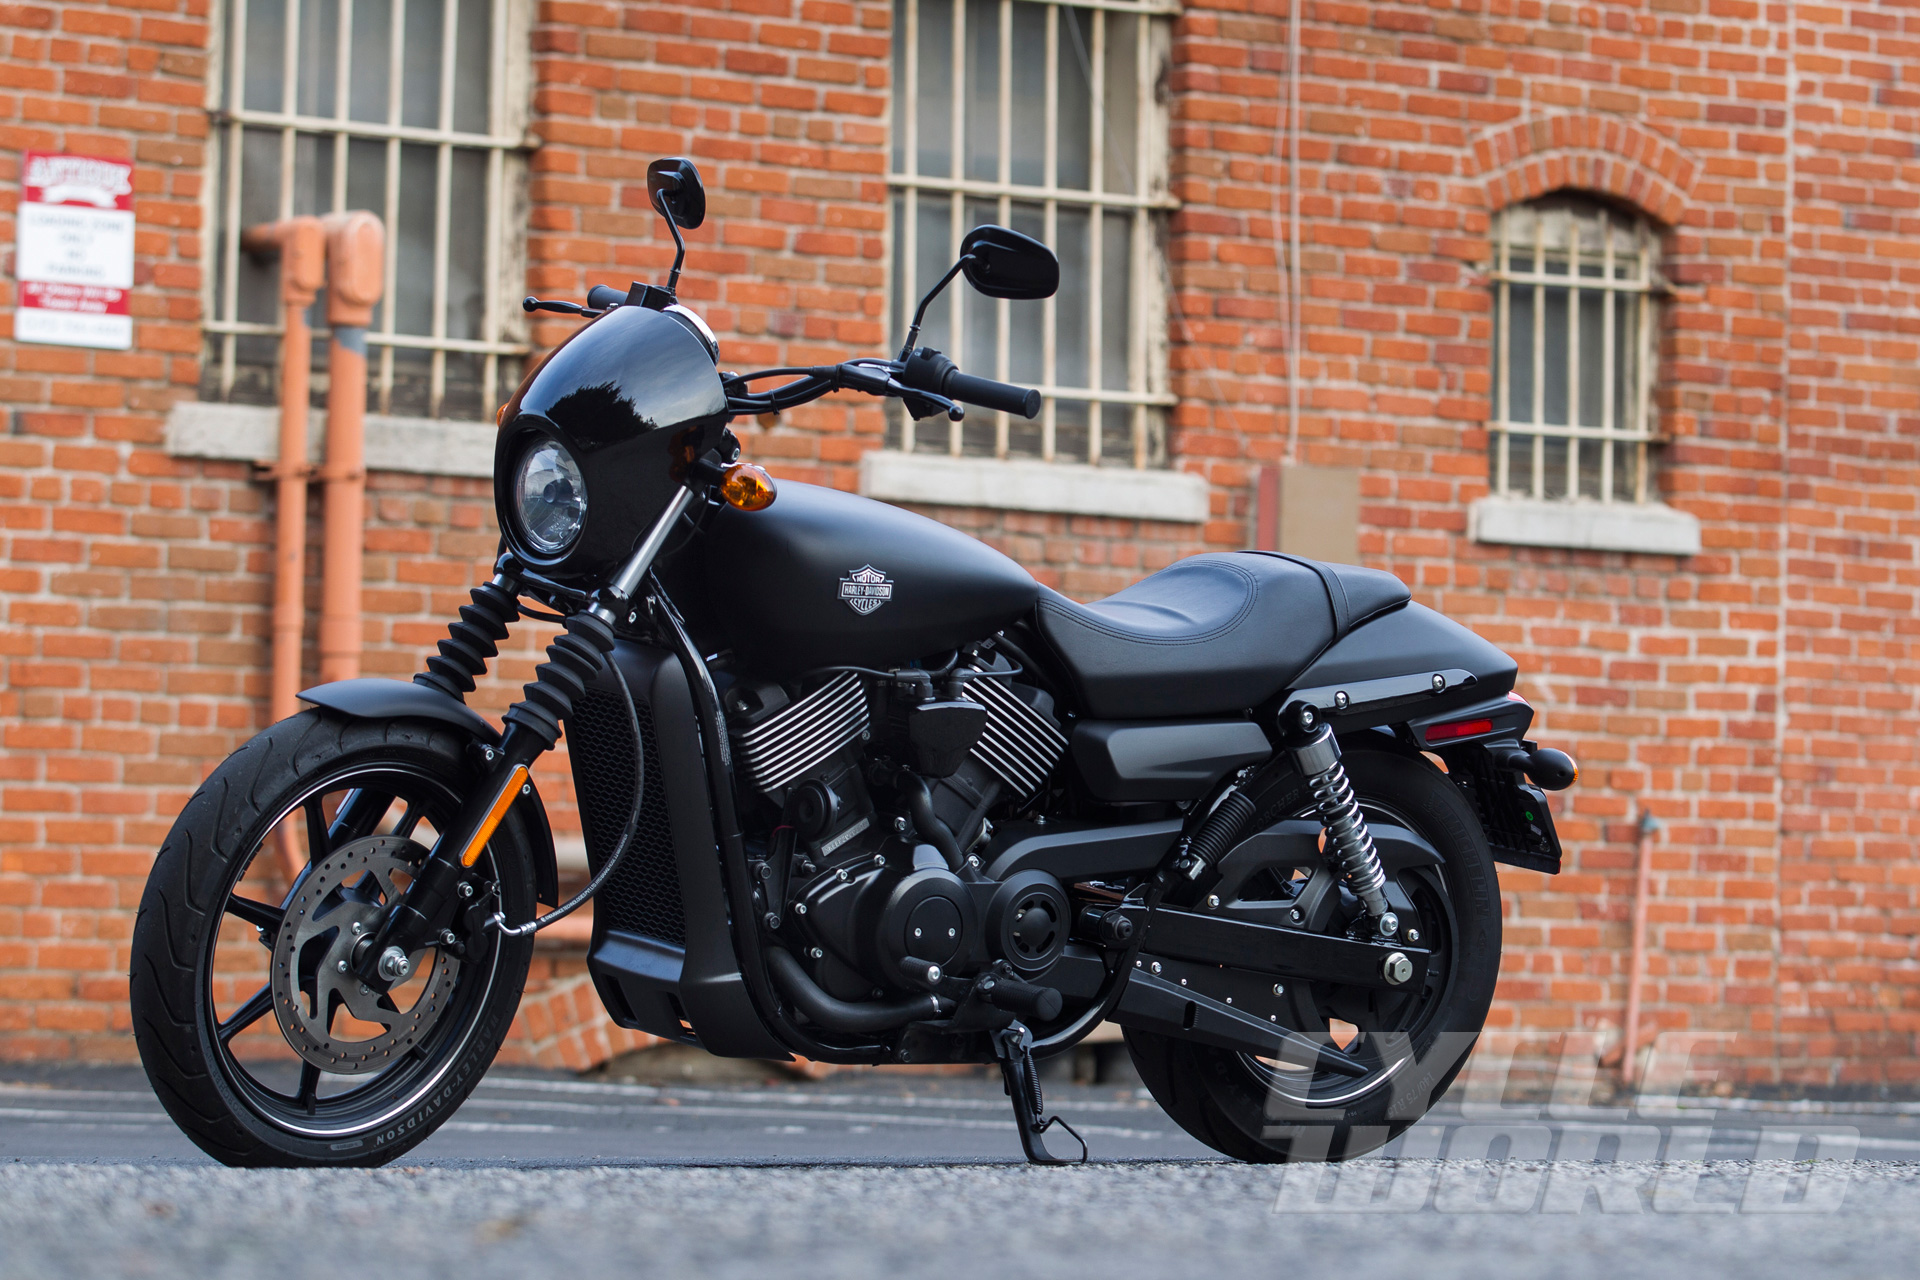 Harley Davidson Sales And Financial Results Second Quarter Of 2014 Cycle World